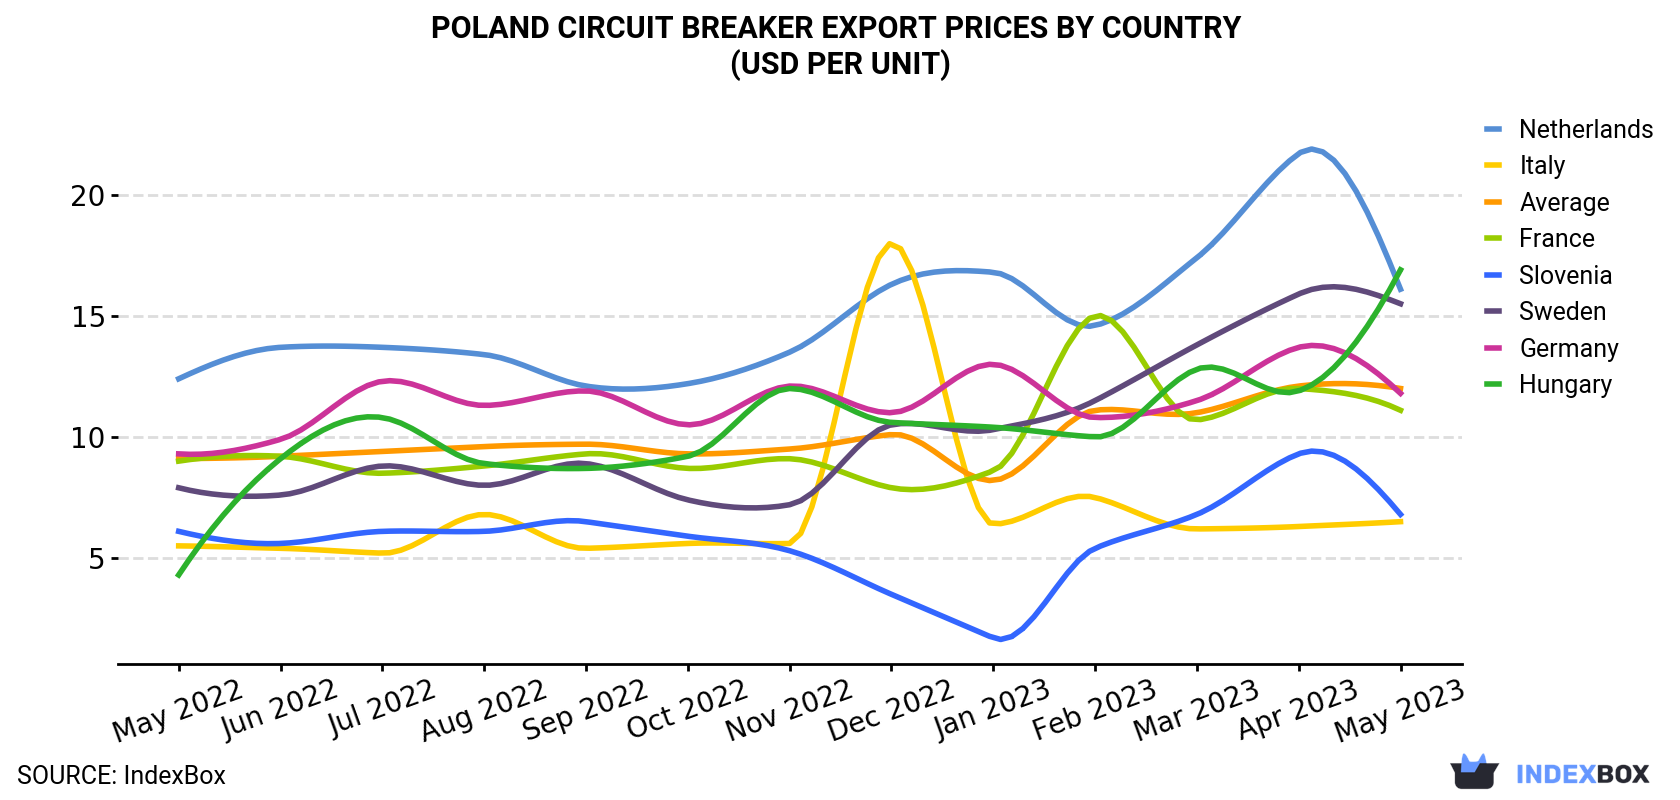 Poland Circuit Breaker Export Prices By Country (USD Per Unit)